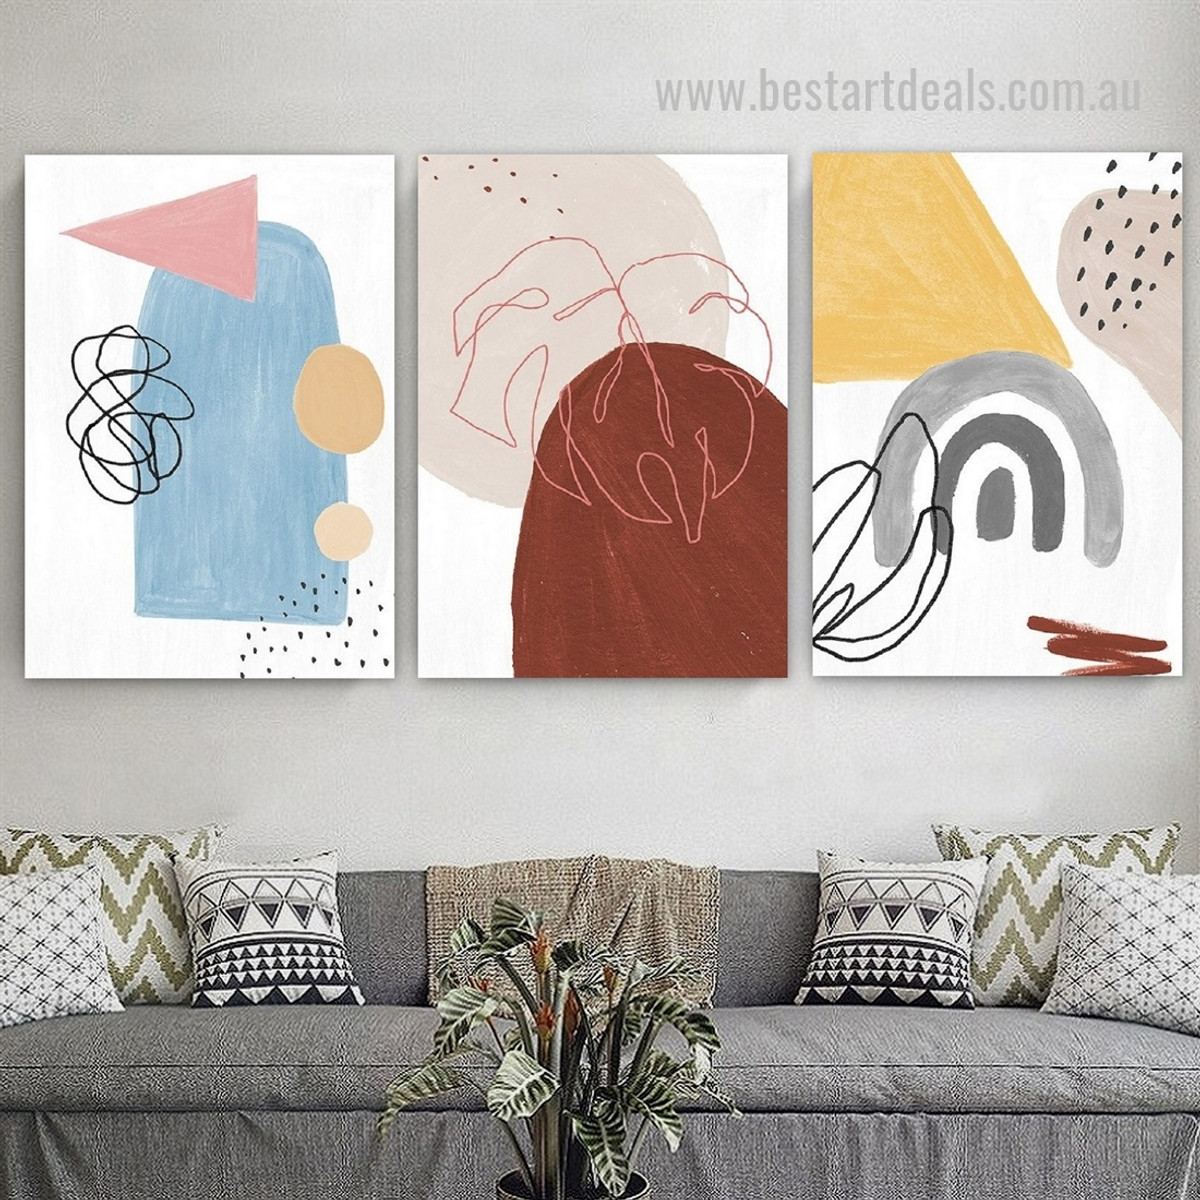 Convoluted Trait Marks Dots Modern Framed Stretched Geometric Artwork Image 3 Piece Abstract Canvas Print for Room Wall Moulding